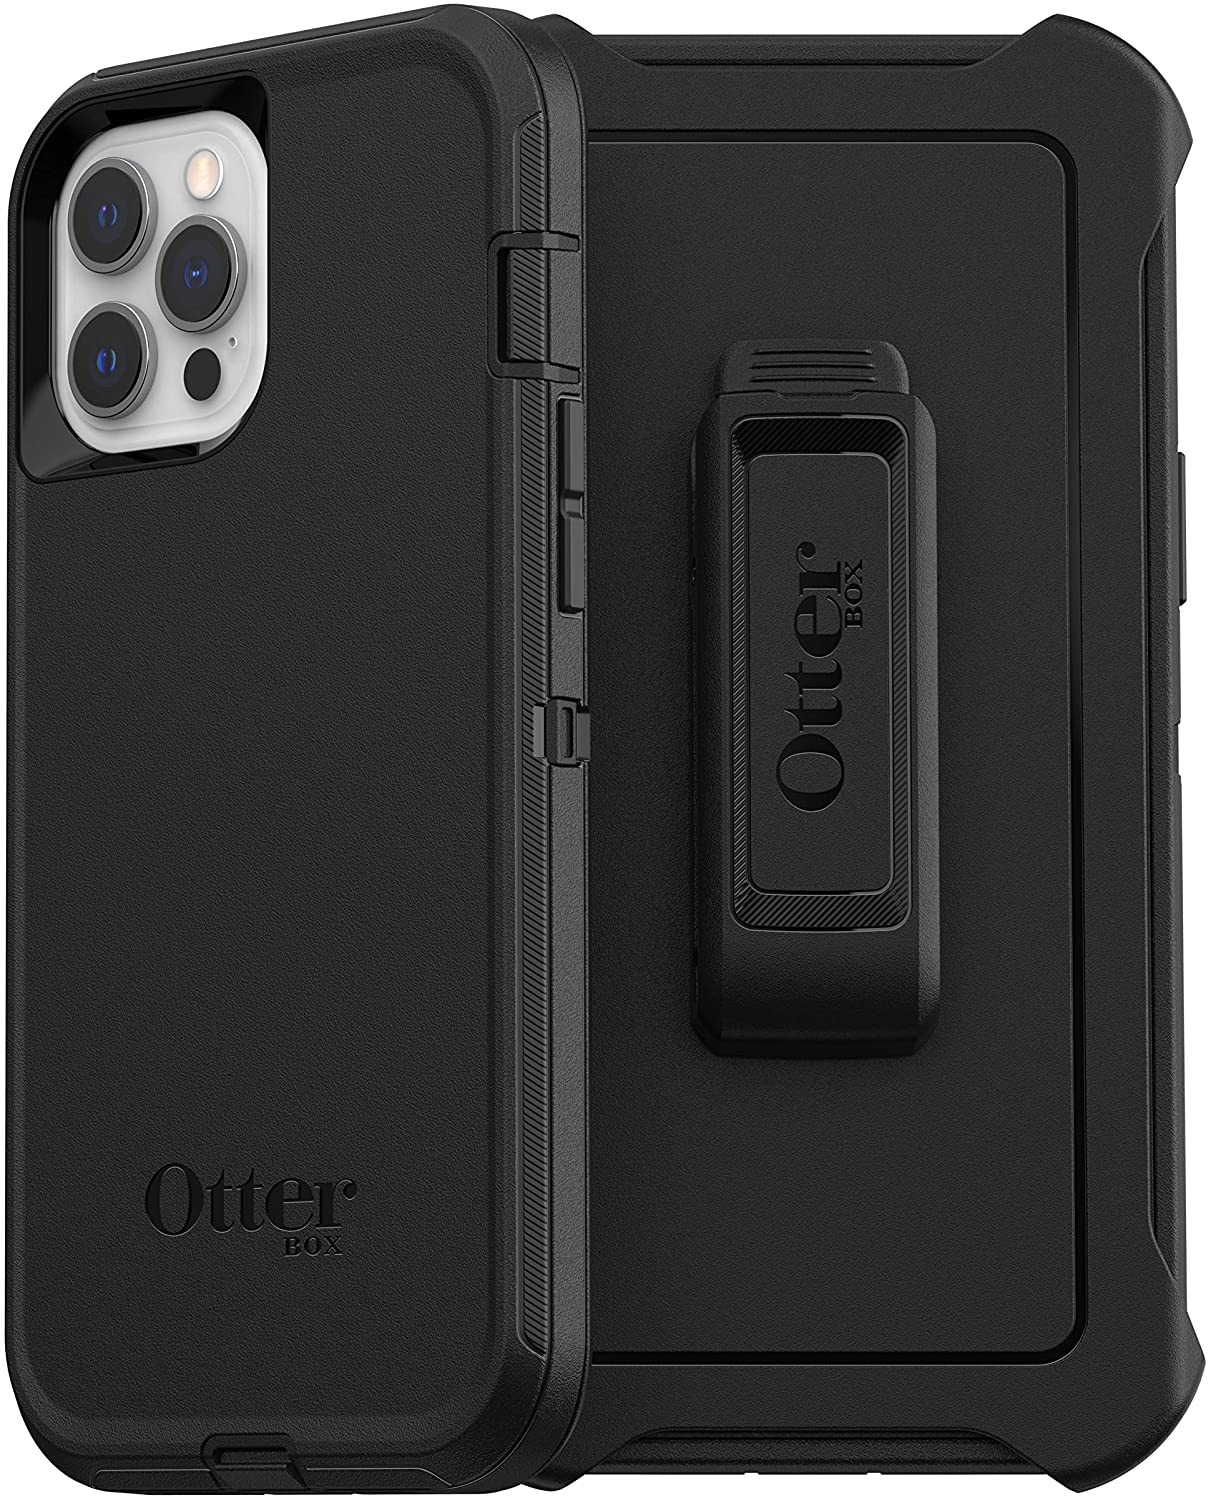 OtterBox DEFENDER SERIES Case &amp; Holster for Apple iPhone 12 Pro Max - Black (New)